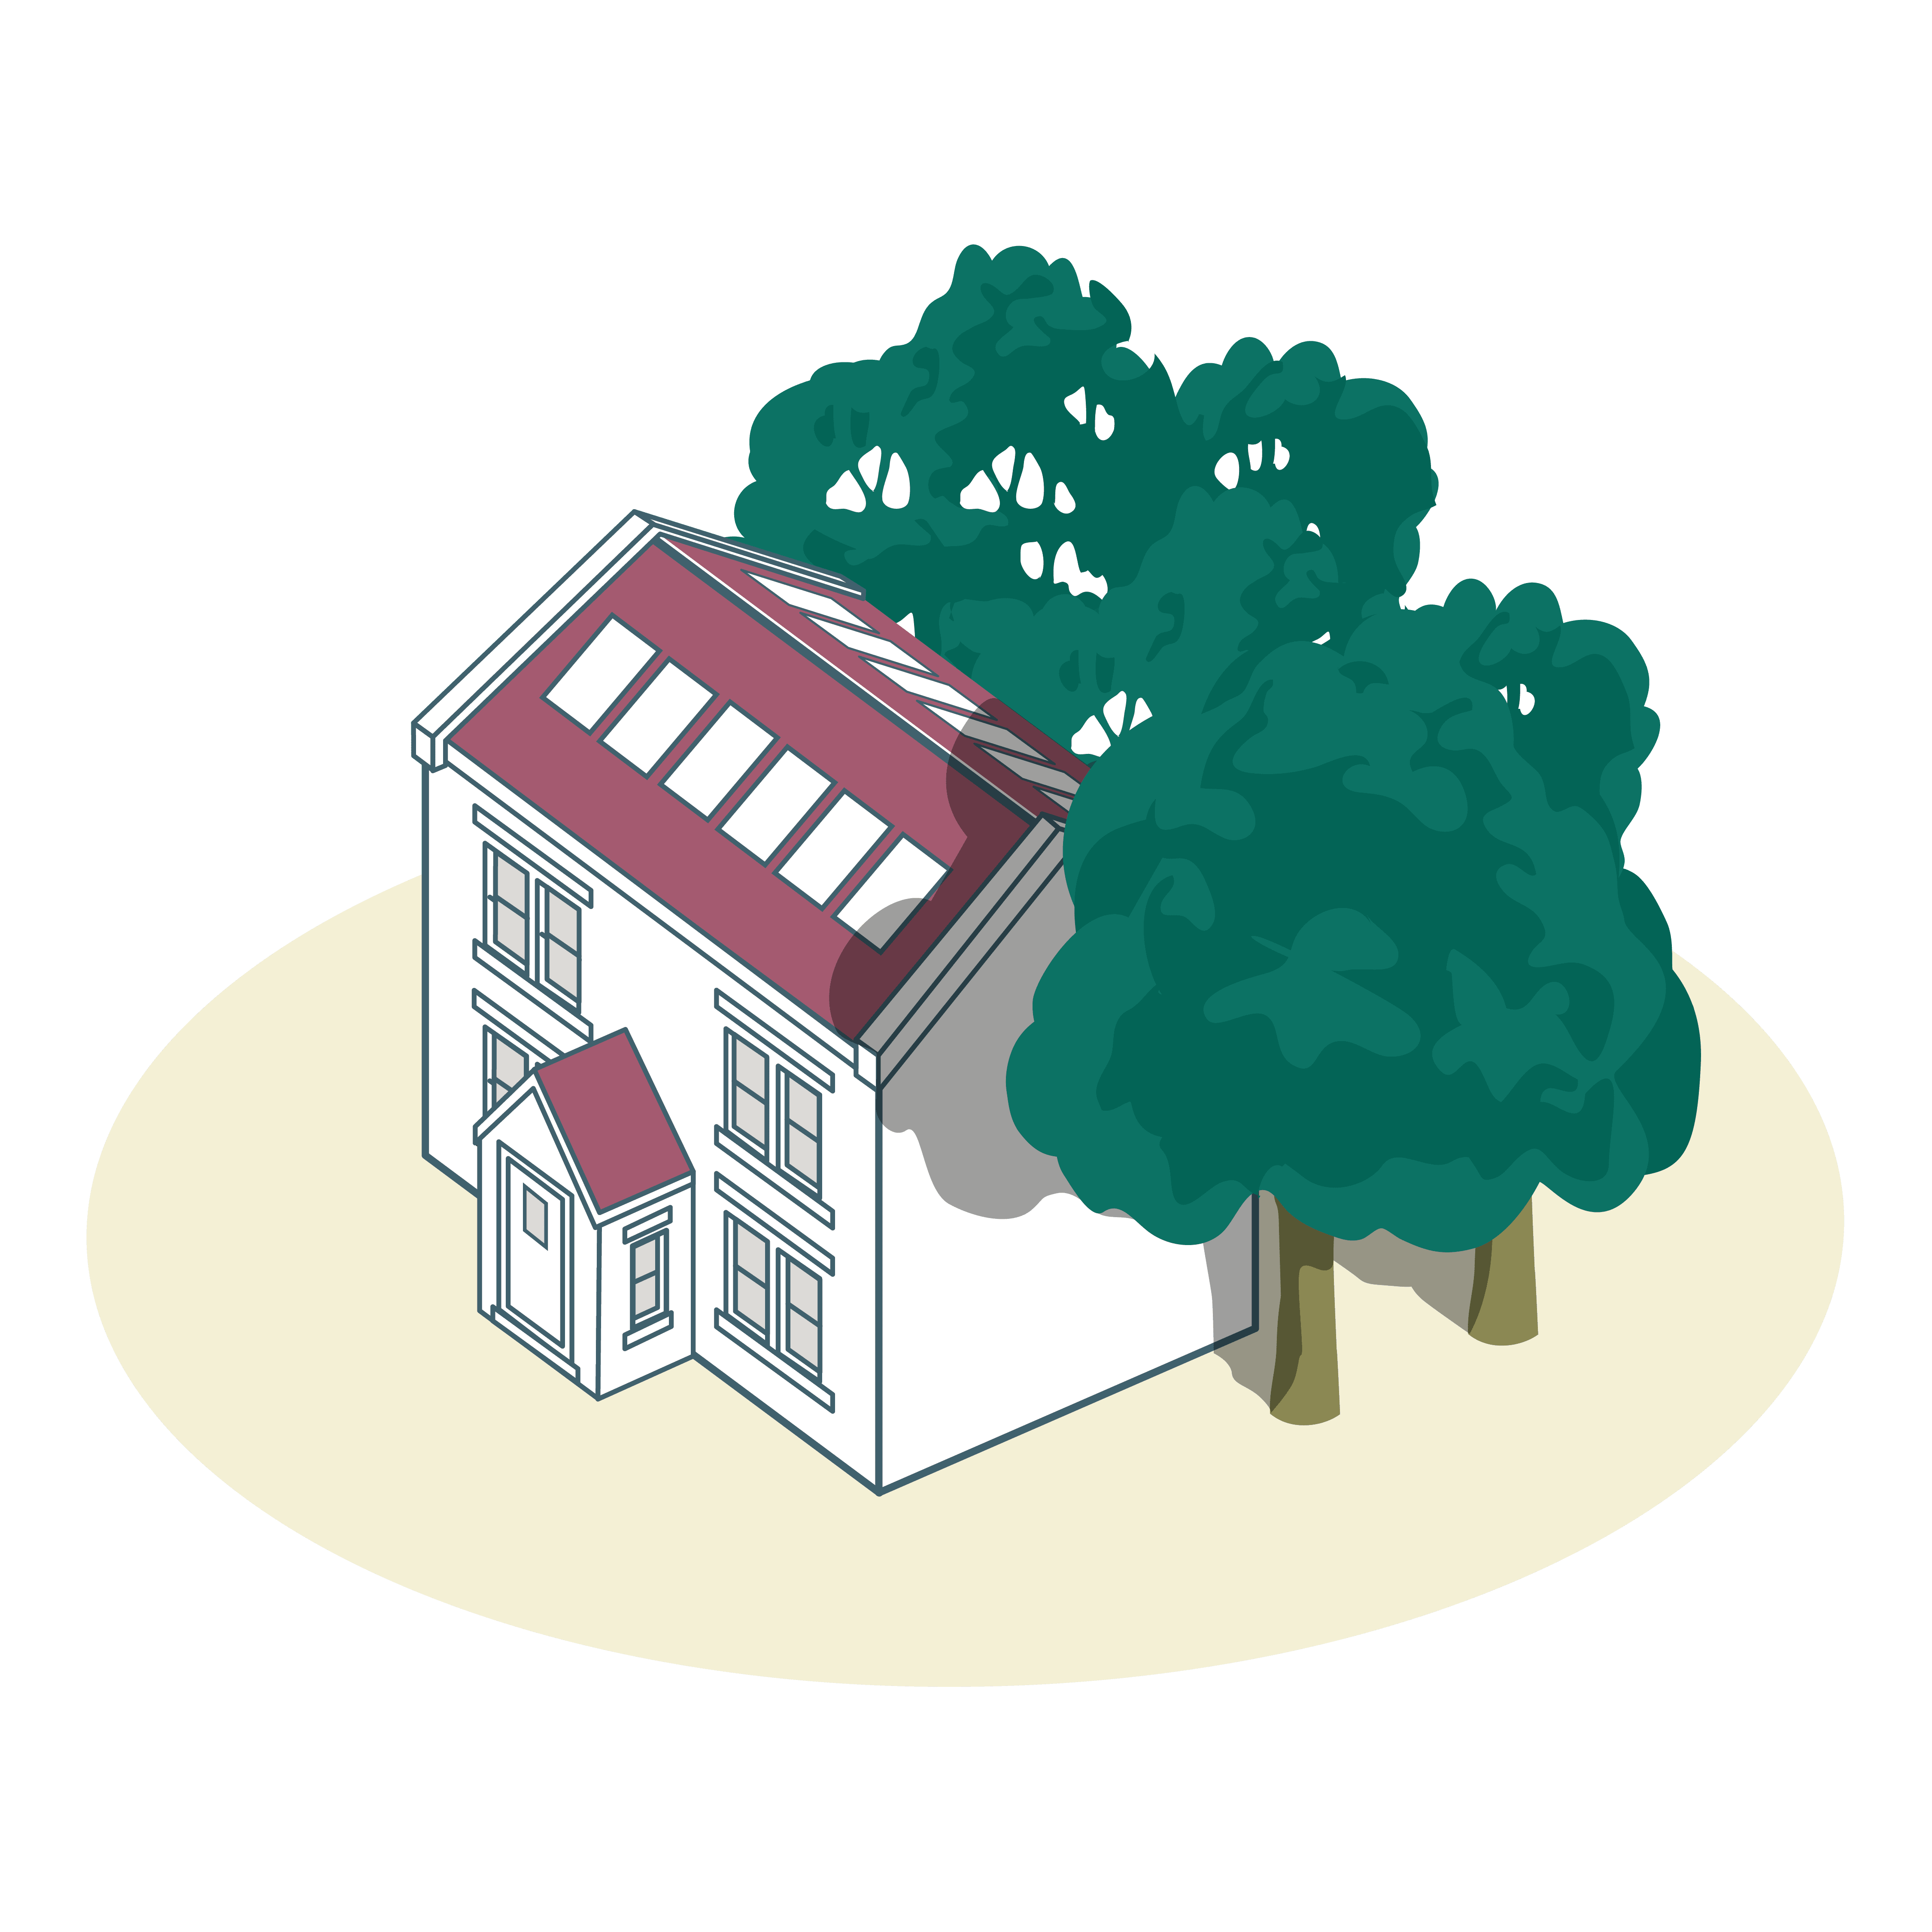 A cartoon house with trees behind it